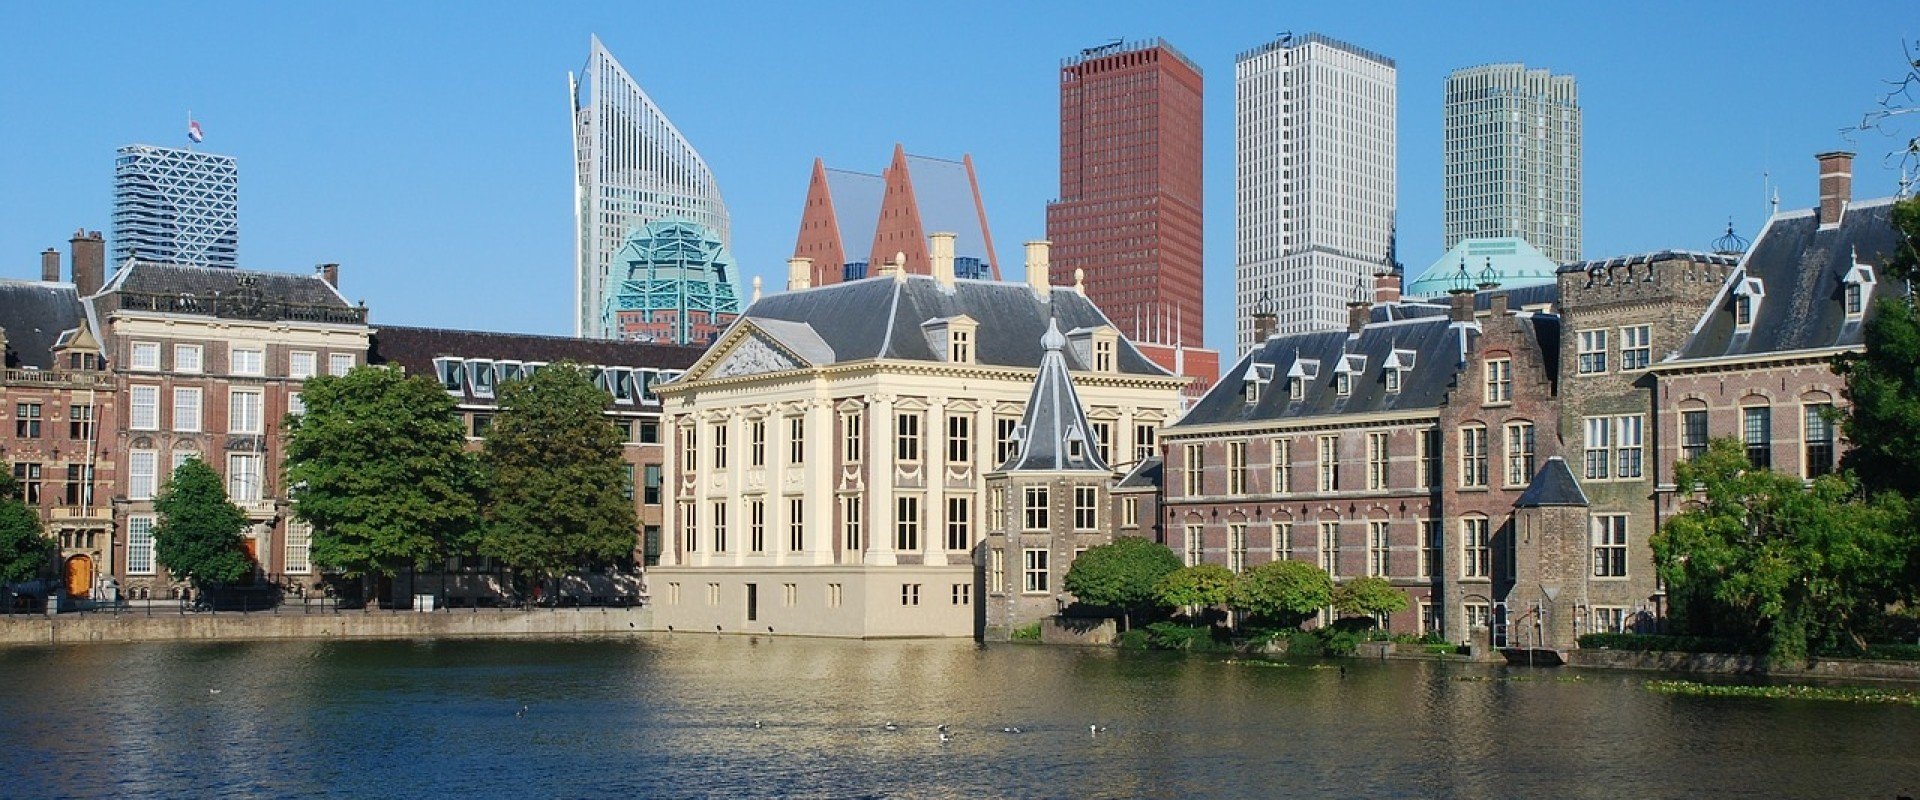 About The Hague (In Dutch: Den Haag)